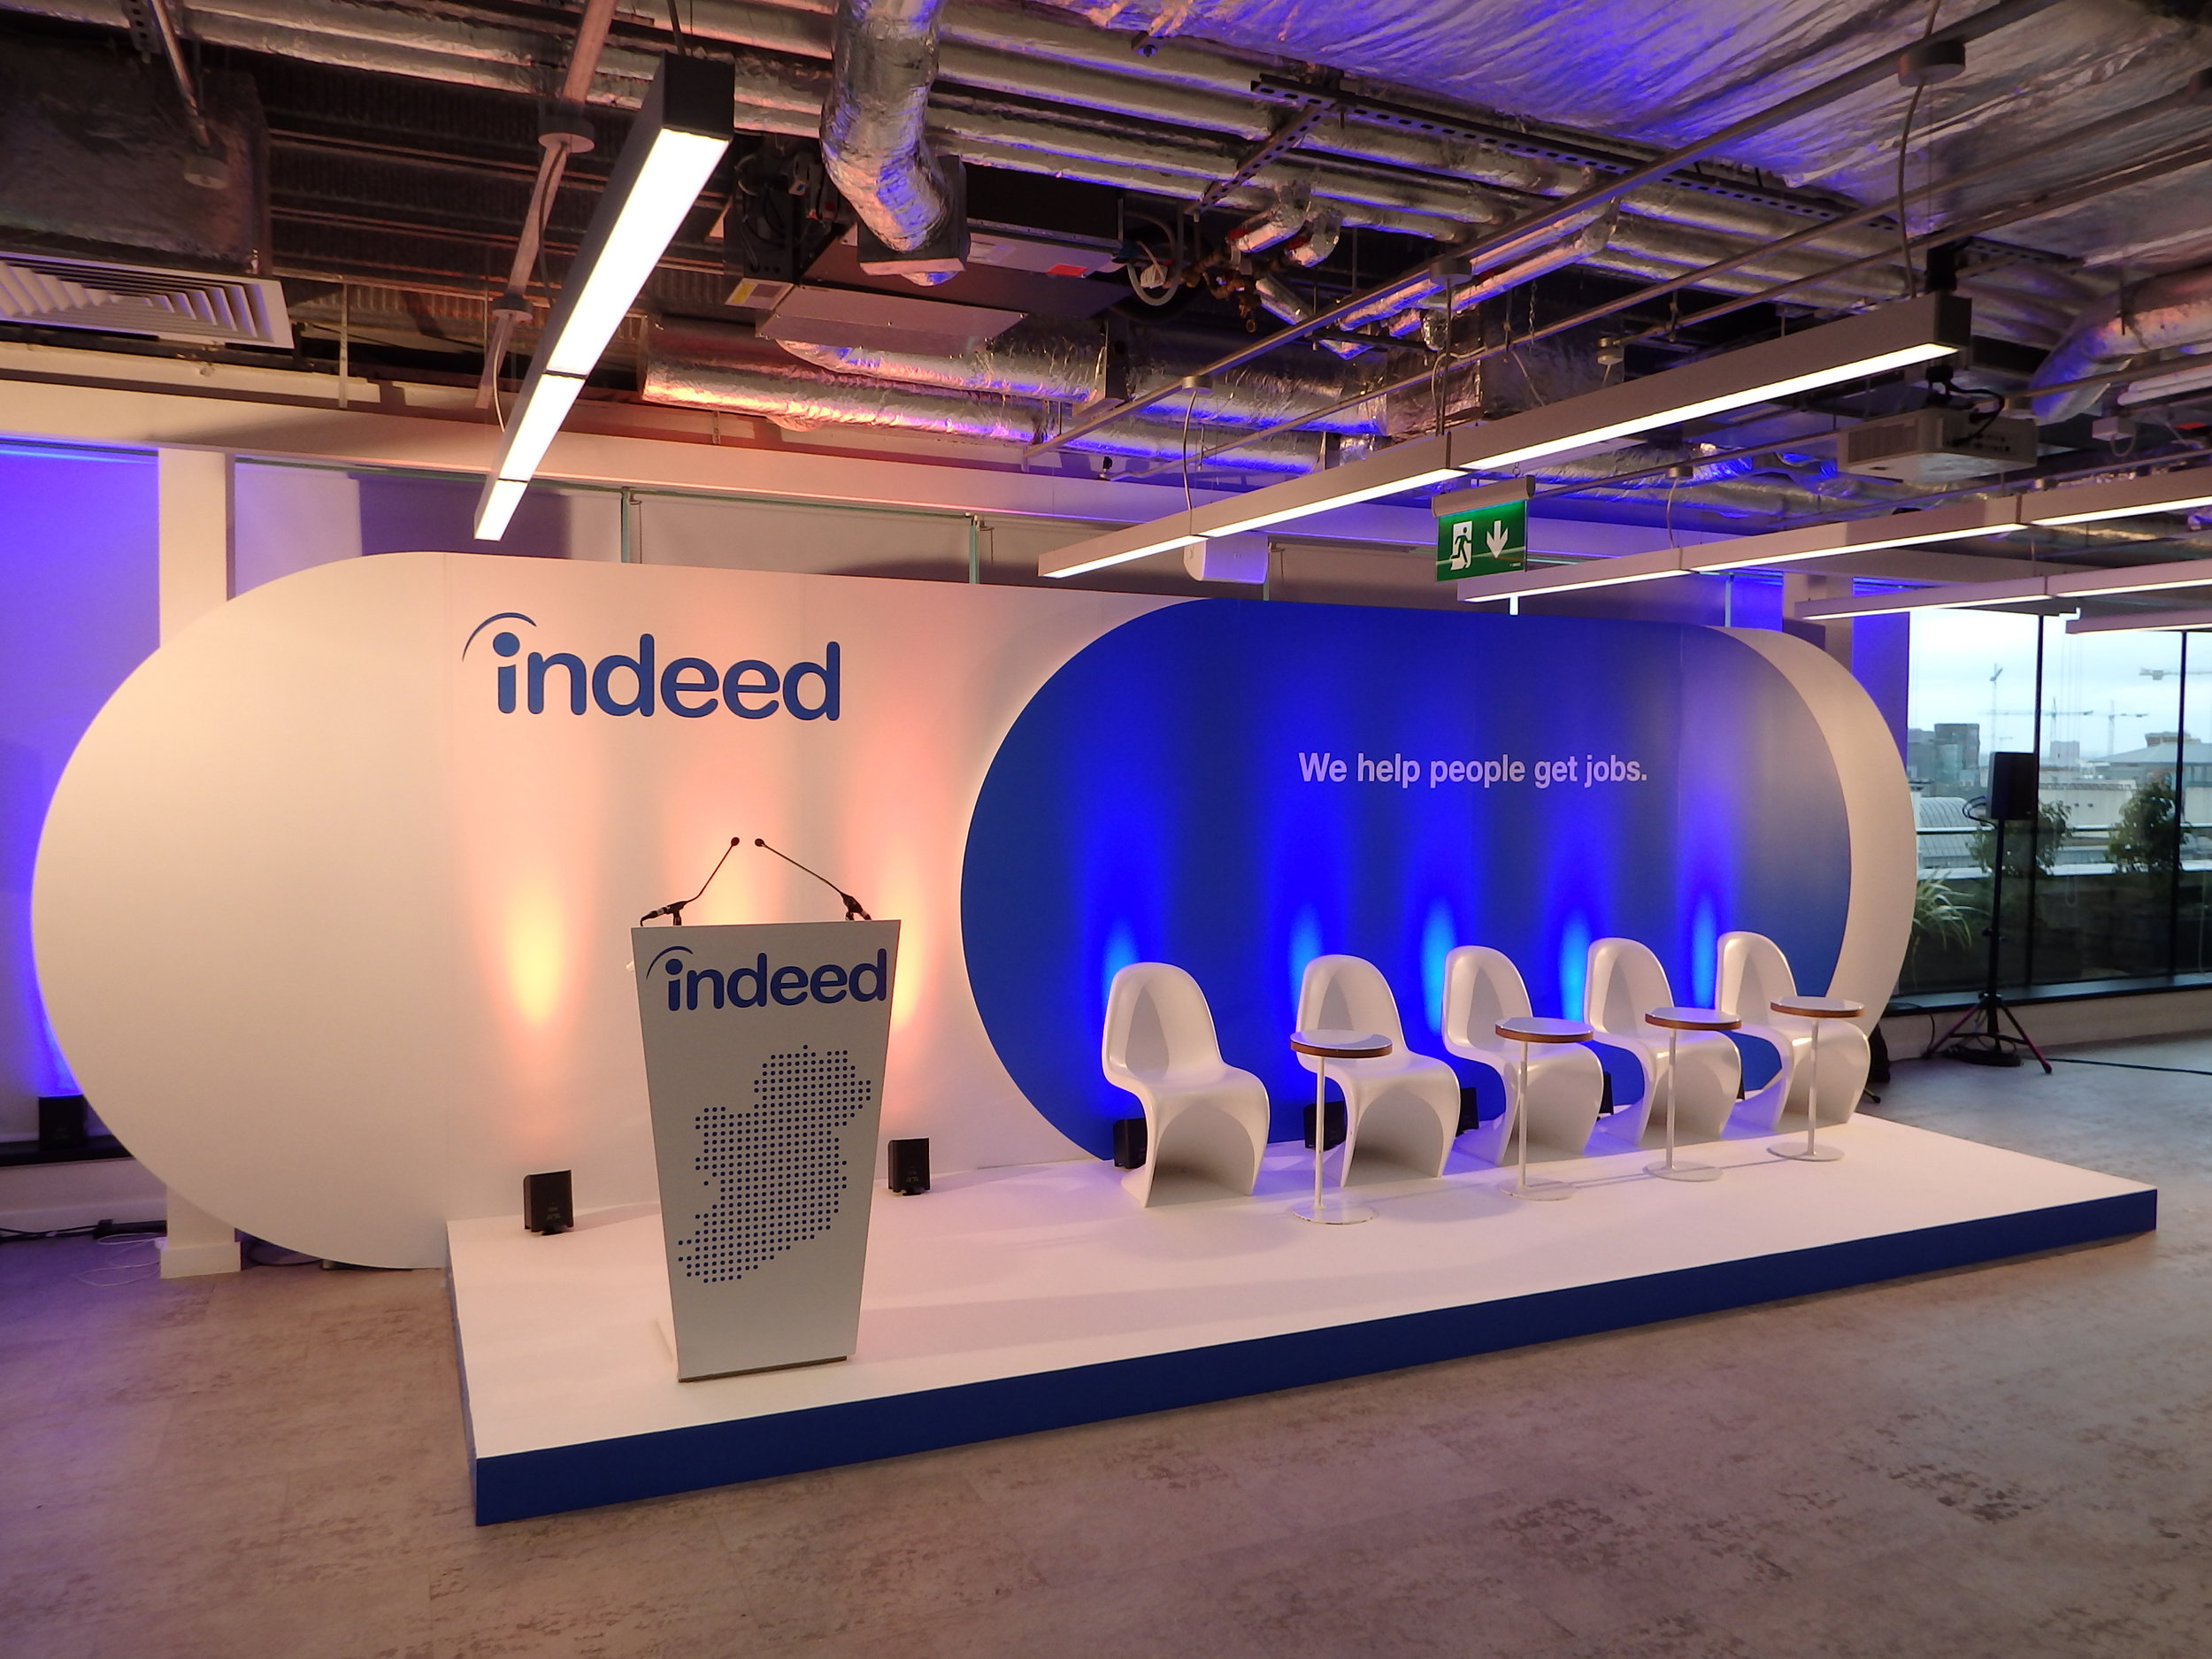 Indeed Jobs announcement — Think Design - Brand Experience and Live Events  Experts